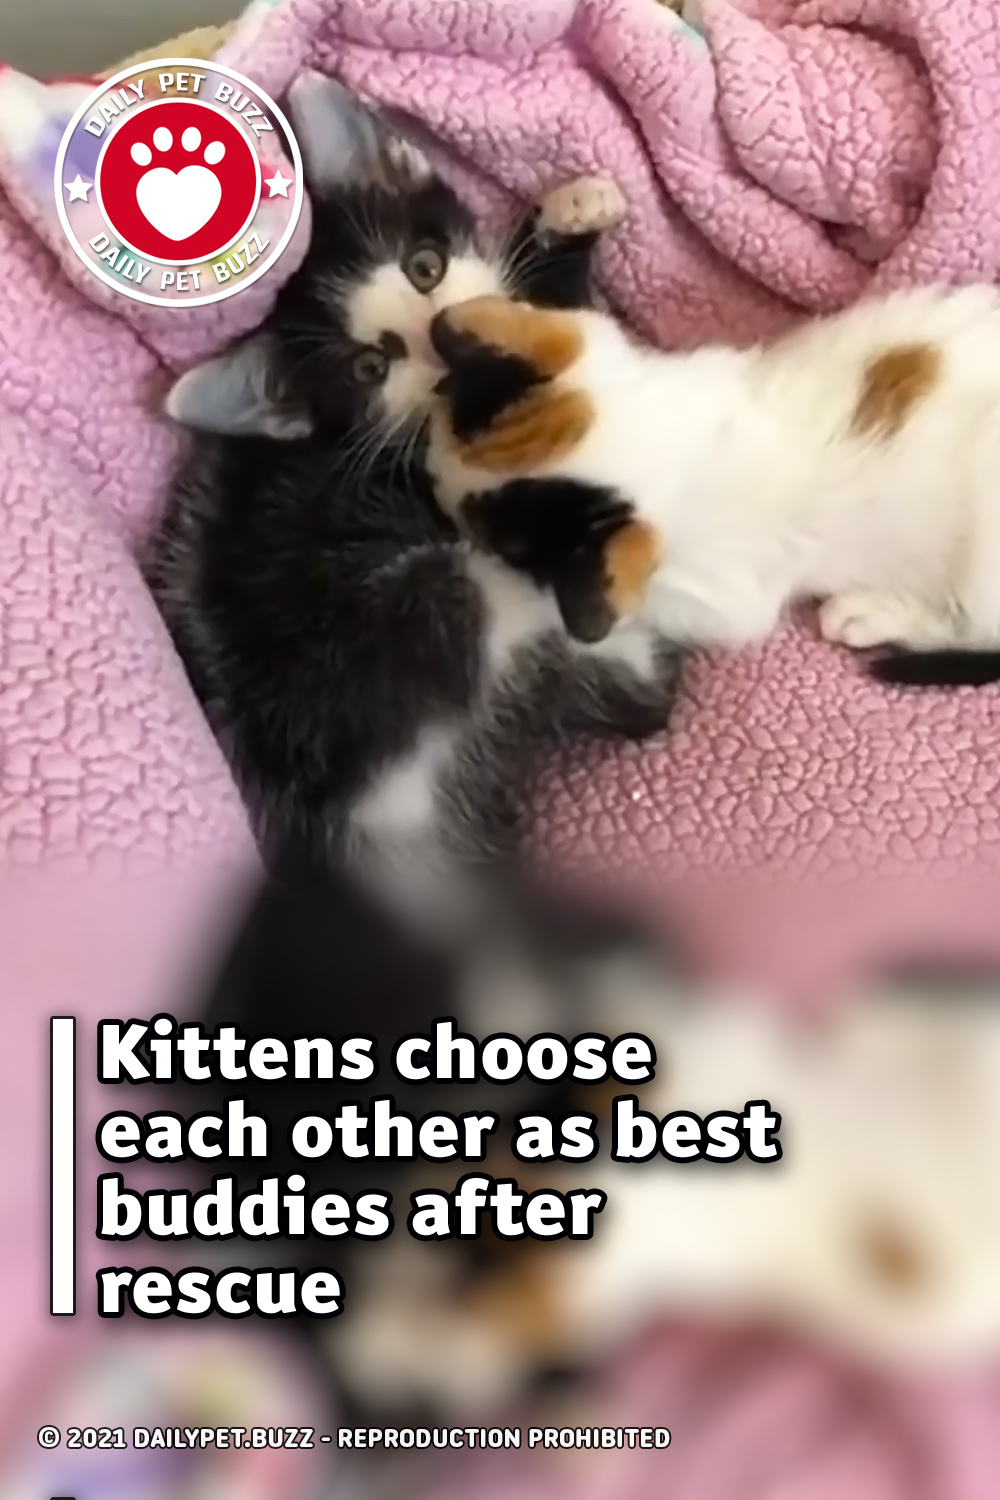 Kittens choose each other as best buddies after rescue